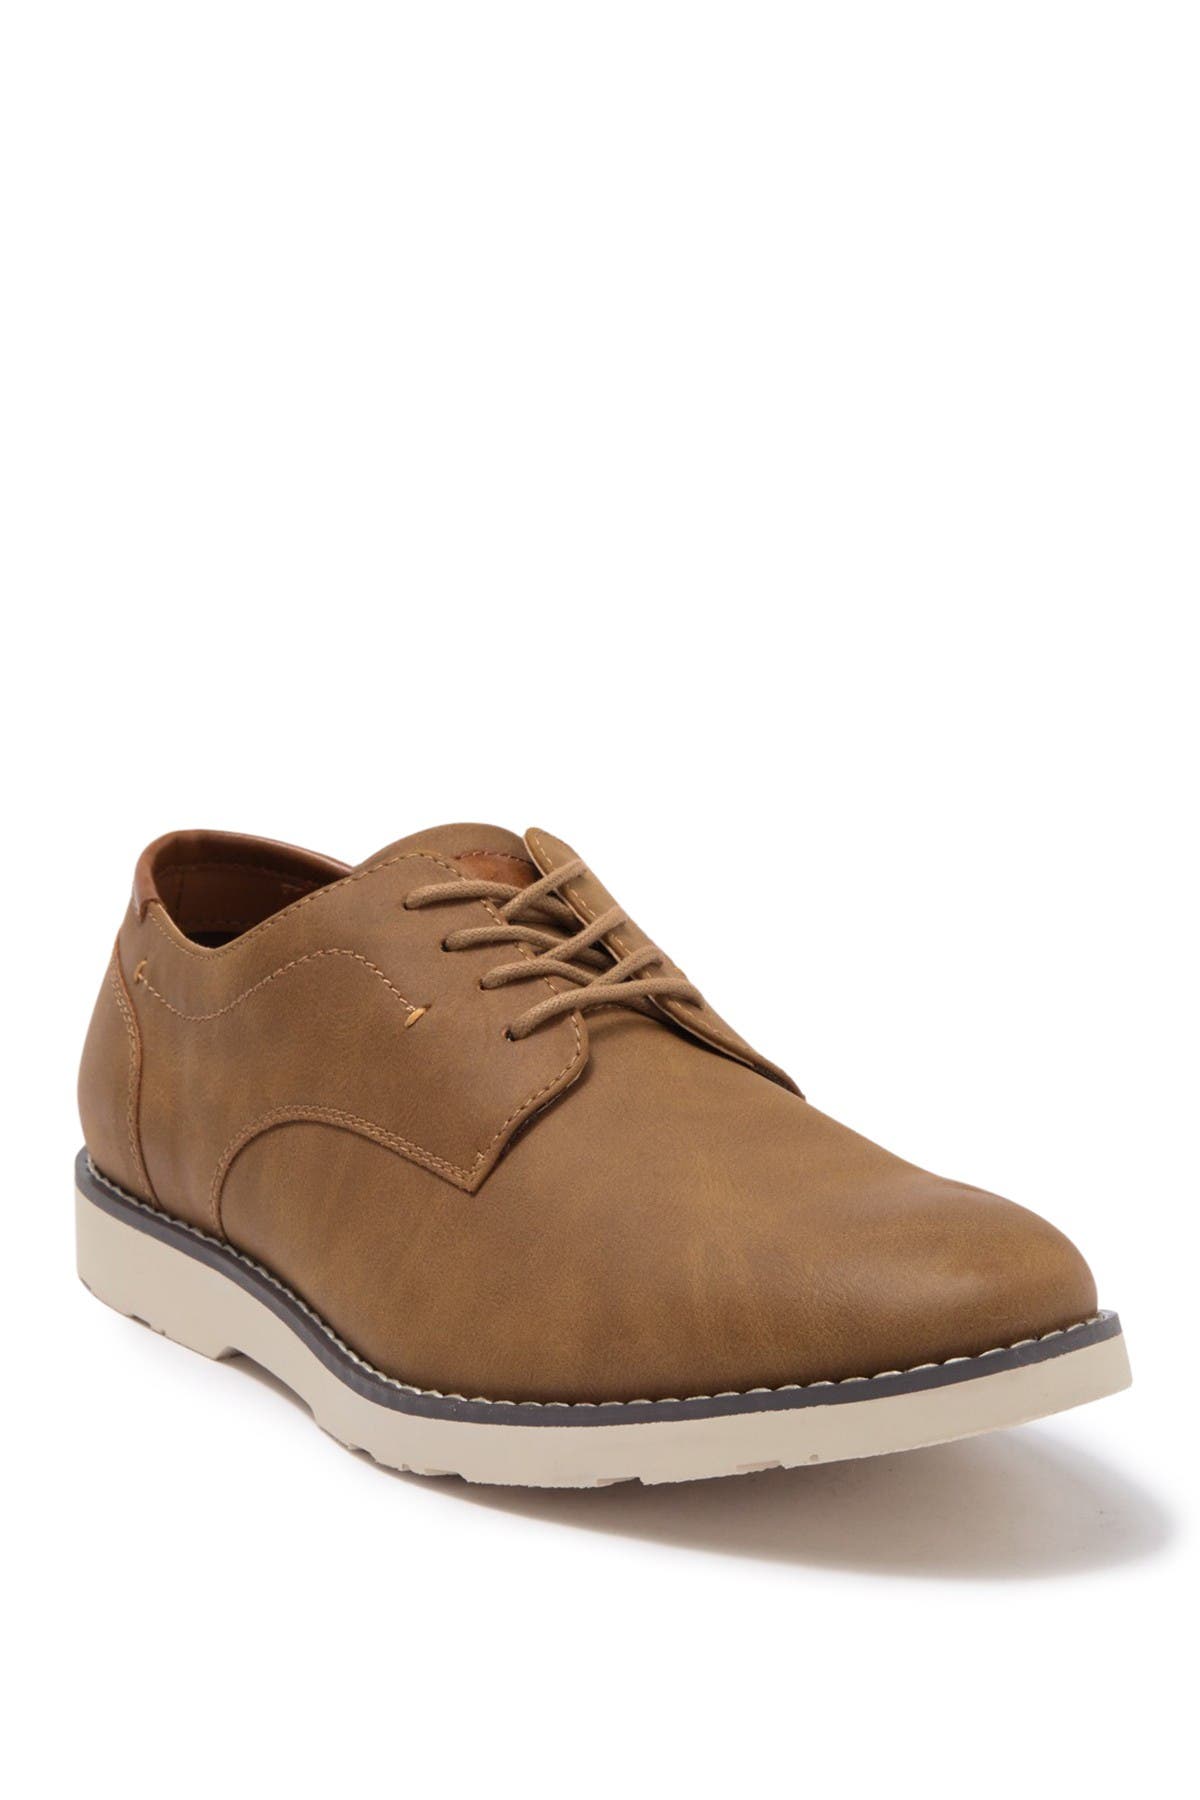 four brothers leather oxford